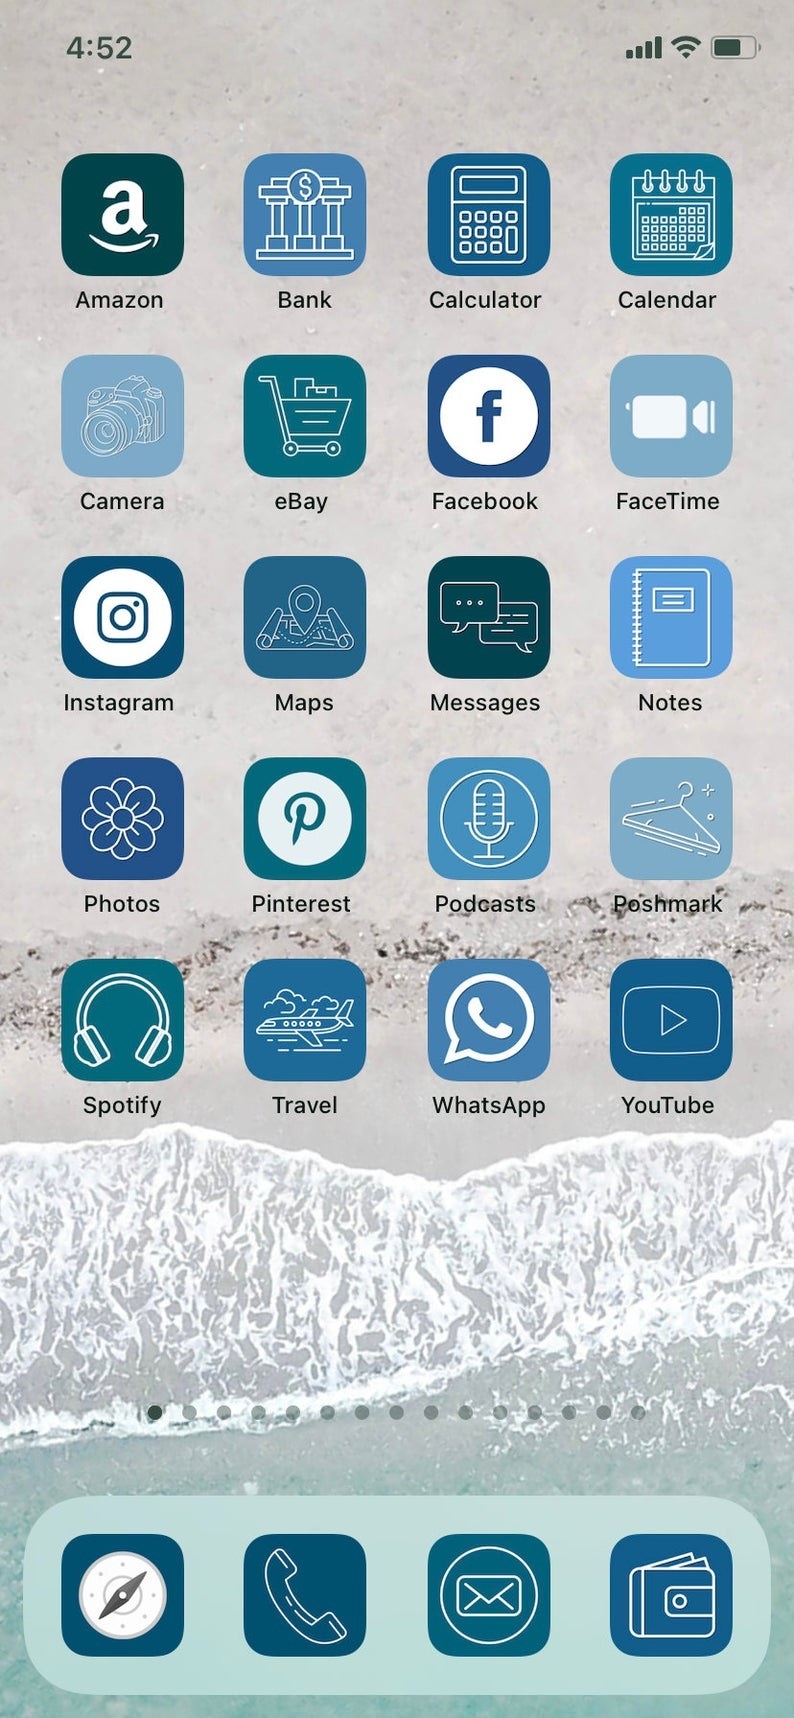 Ios14 Aesthetic App Icon Themes This soothing beachy aesthetic that'll fill you with calmness every time you check the time 4. ios14 aesthetic app icon themes